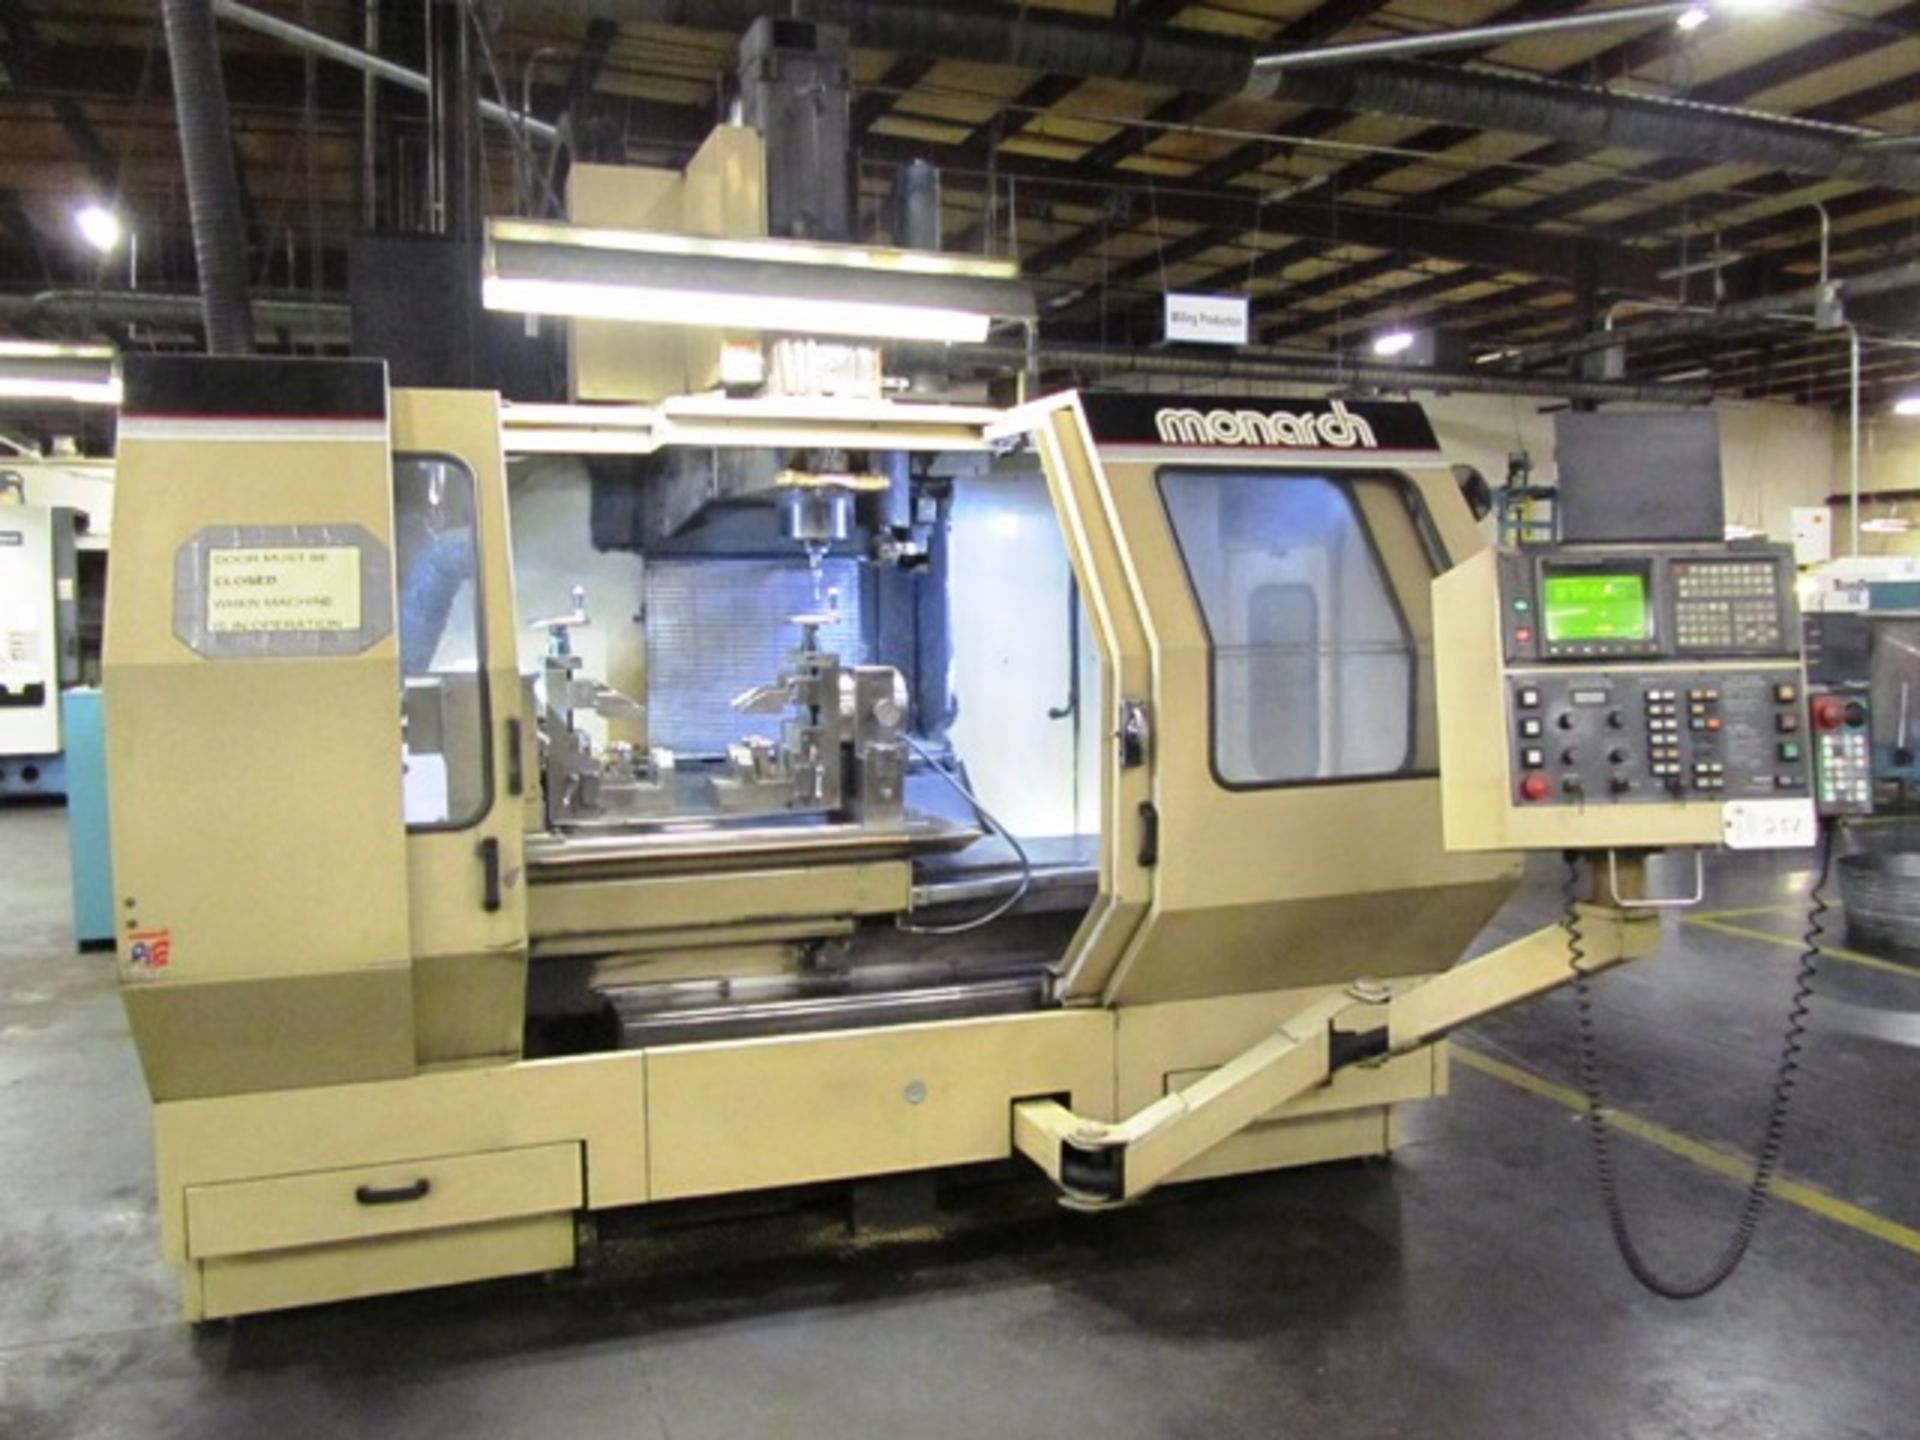 Monarch Model VMC45B 4-Axis CNC Vertical Machining Center with 18'' x 48'' Table, 9'' Diameter 4th